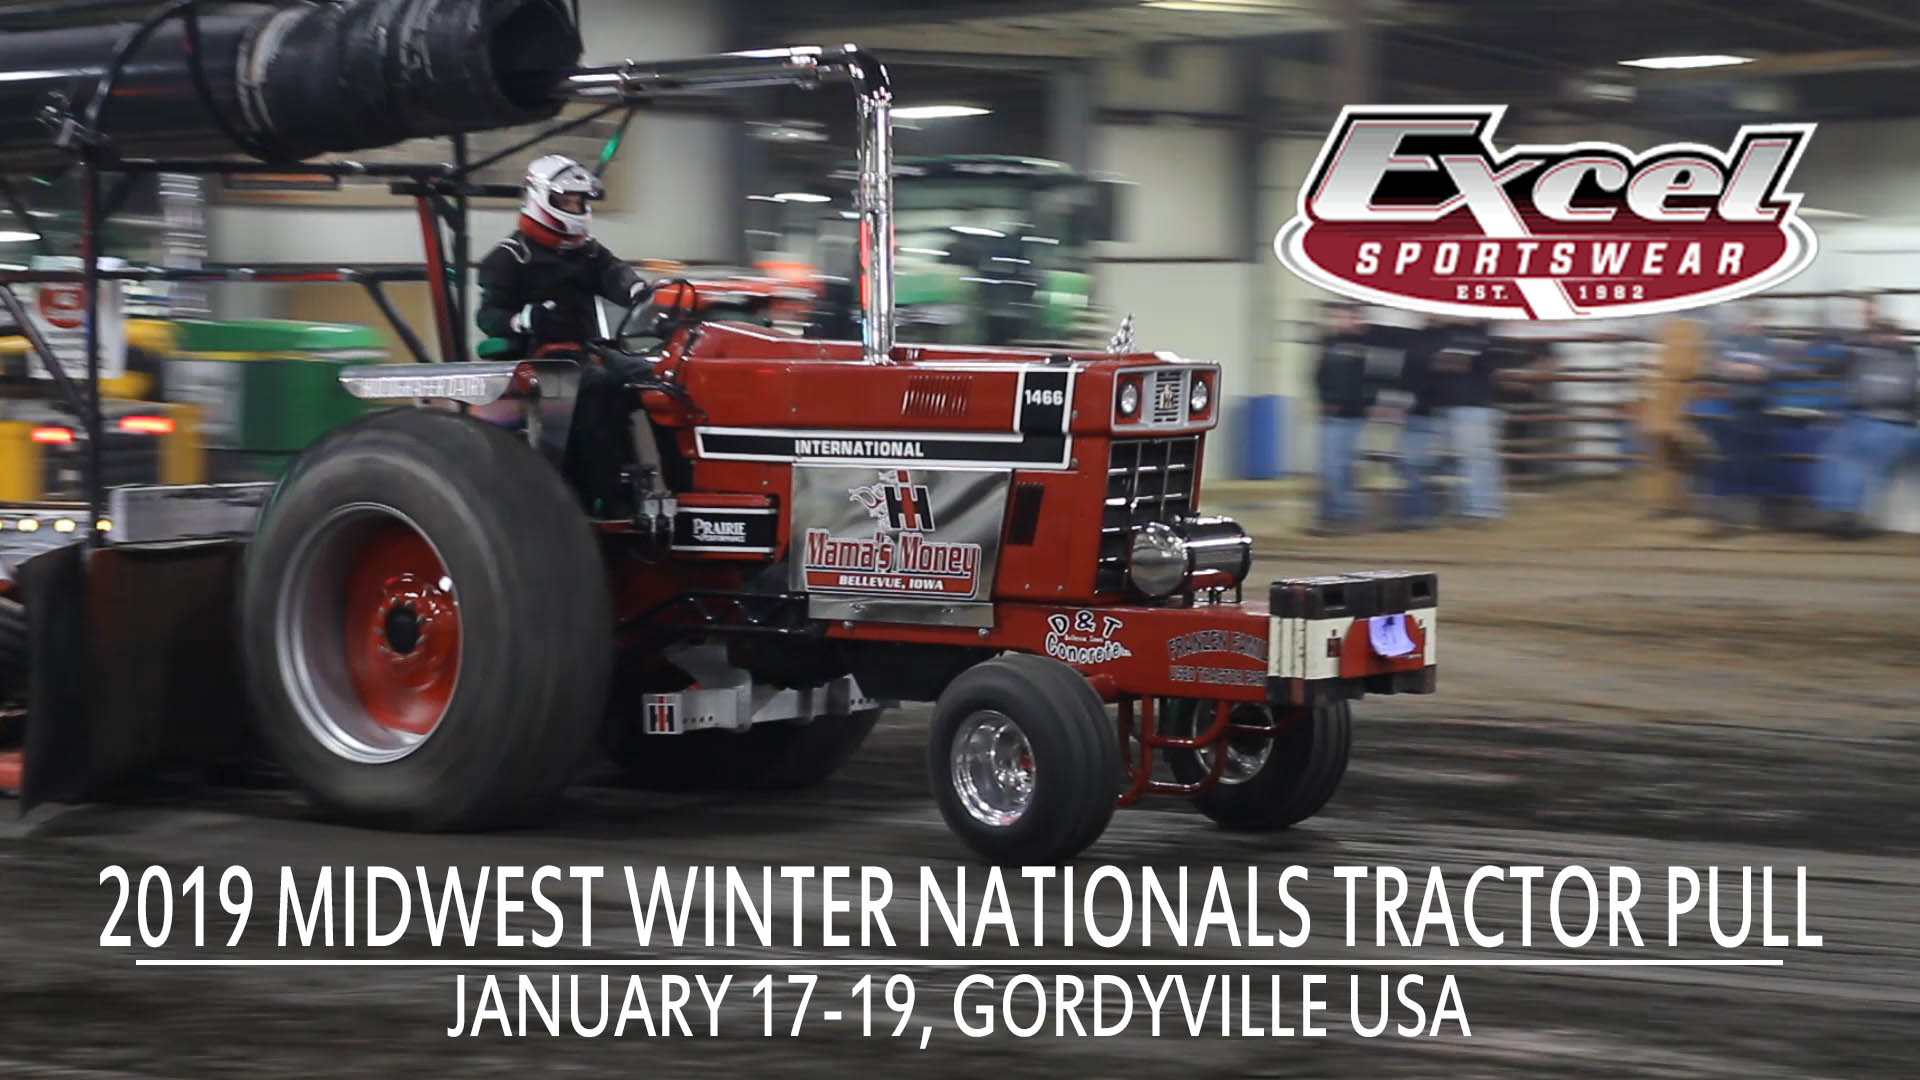 2019 Midwest Winter Nationals Tractor Pull - Gordyville USA - Excel Sportswear Blog